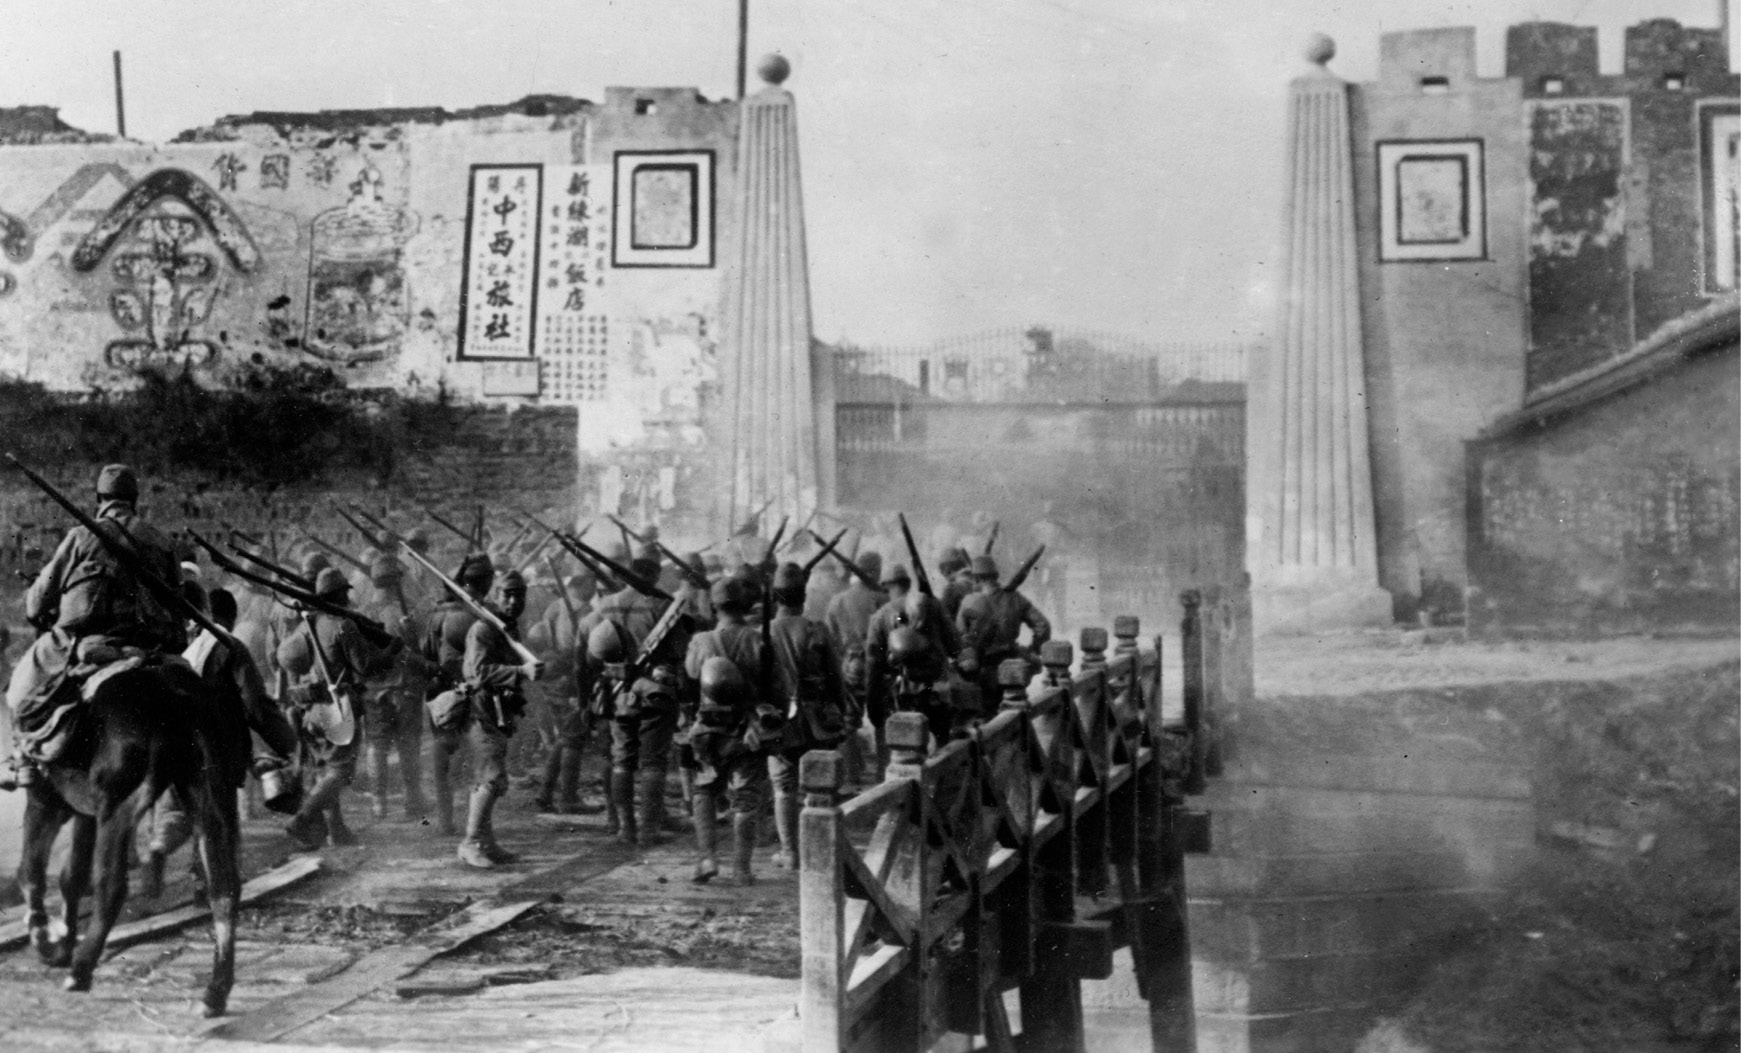 In late 1937 Japanese troops invaded Nanking China and brutally massacred - photo 4